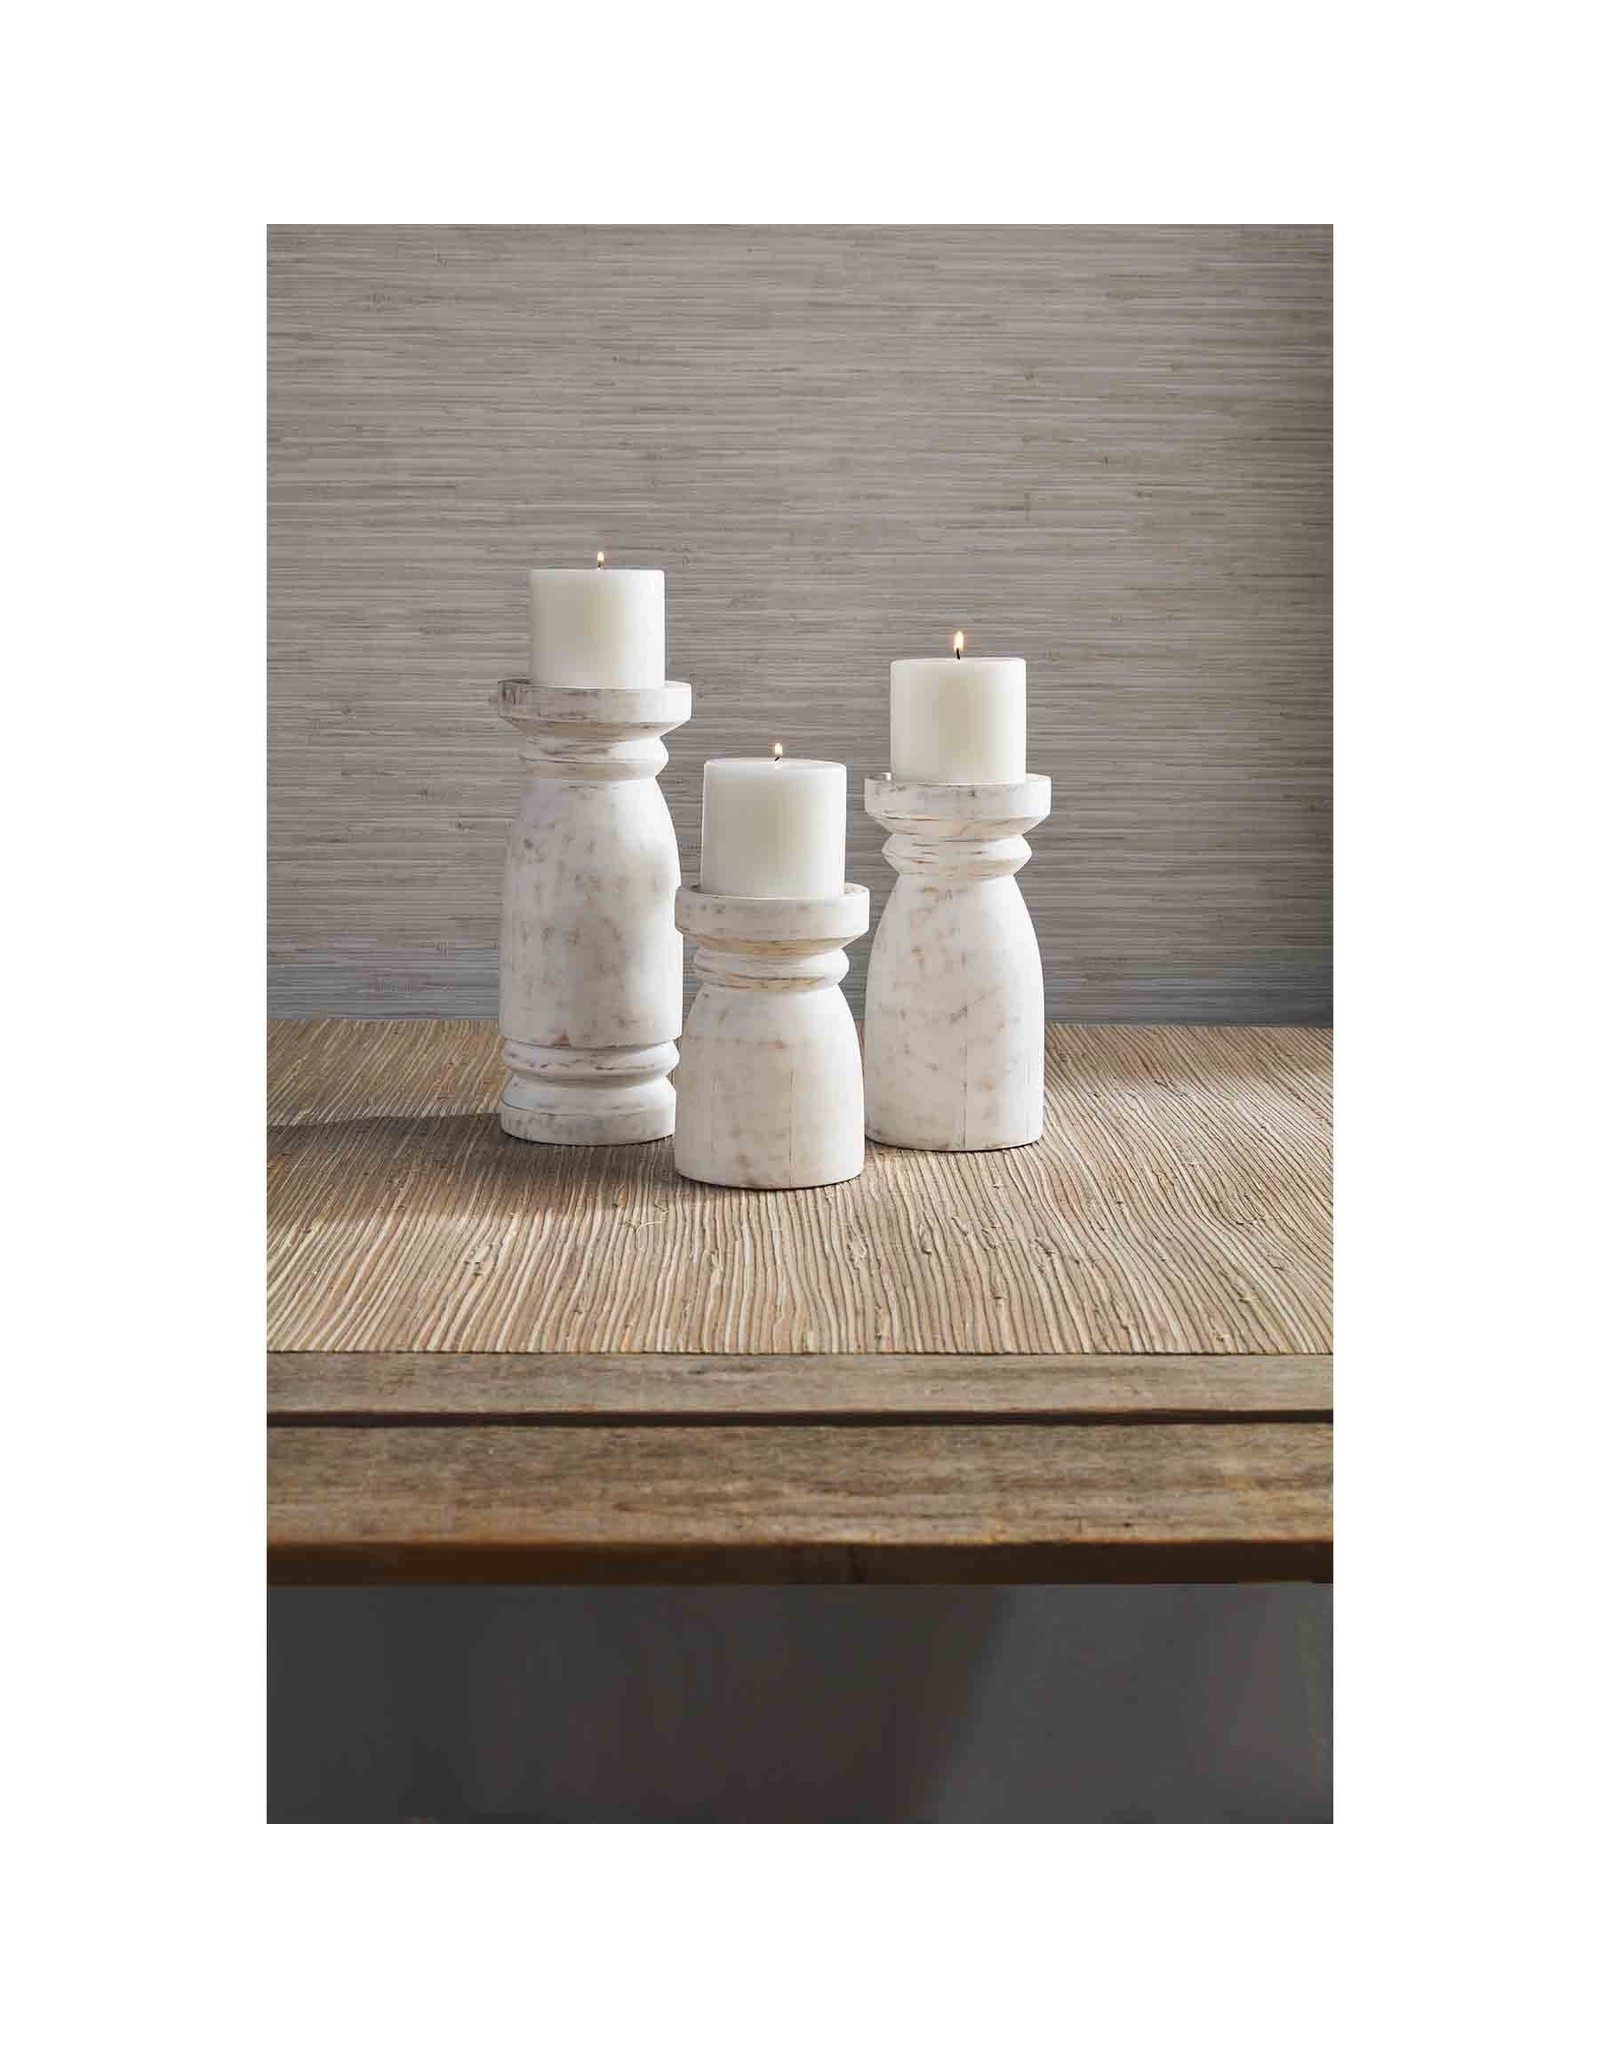 Mud Pie White Washed Wood Candle Holder 8 Inch